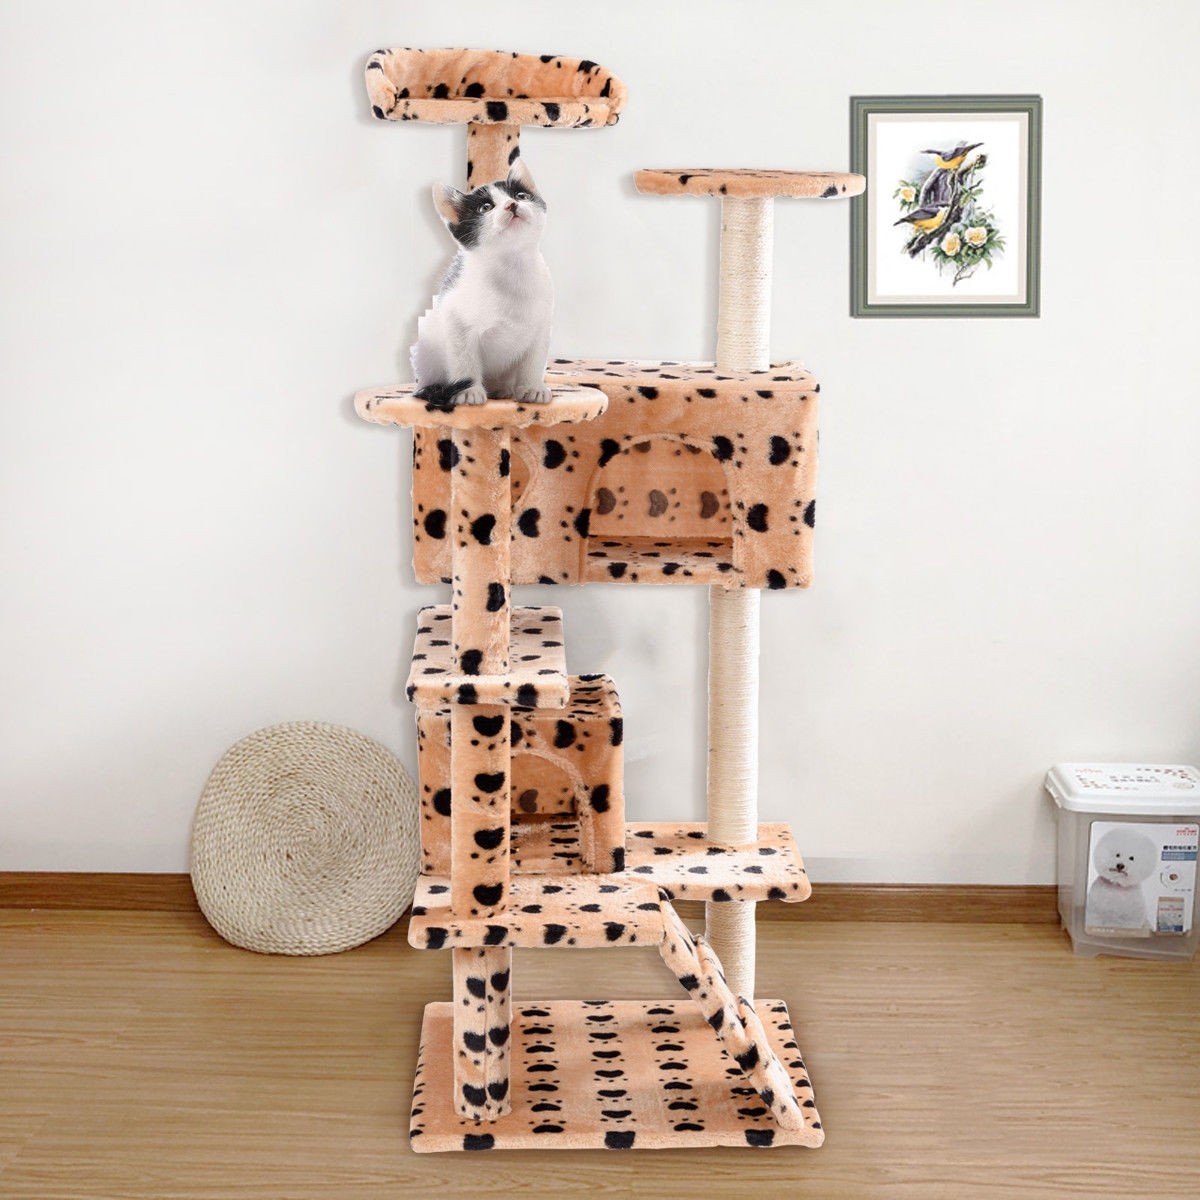 52 In. Cat Scratching Post and Ladder Kitten Tower Tree